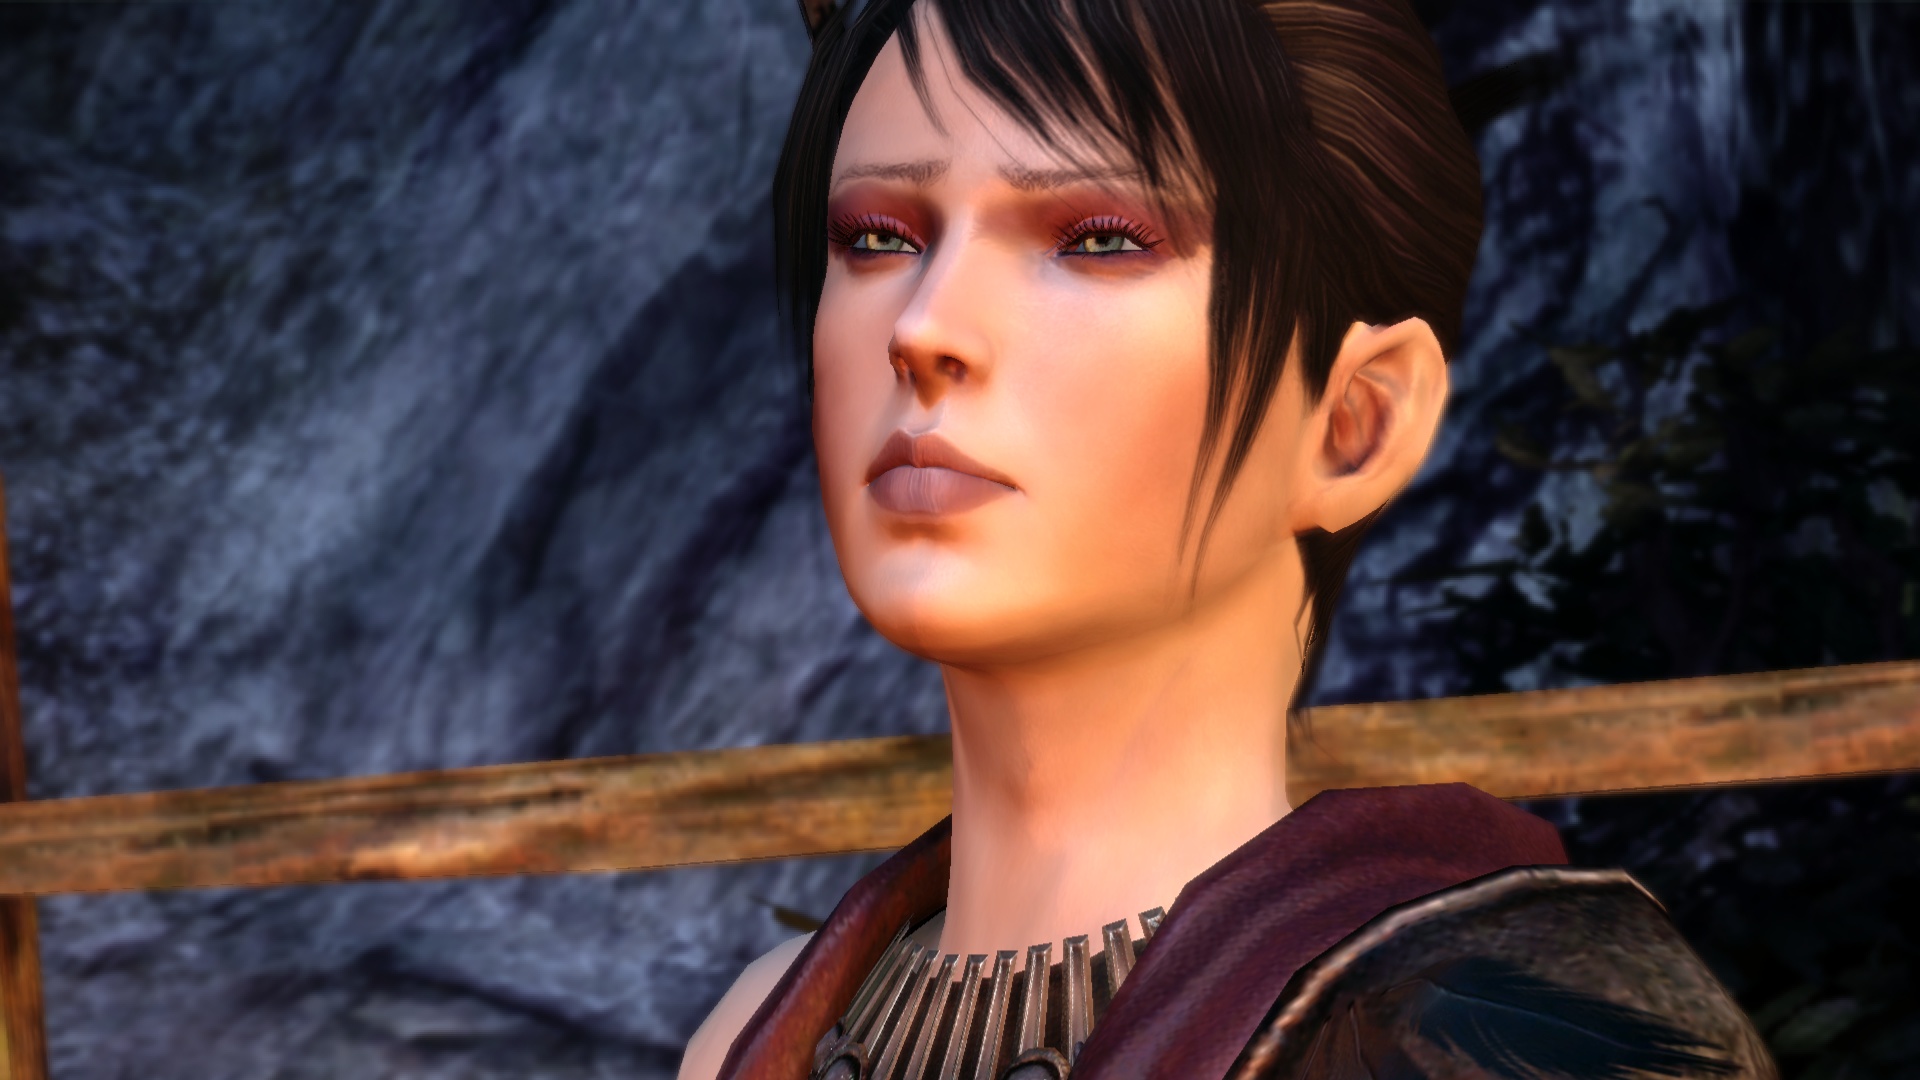 Dragon Age: Origins - Continued Romance with Zevran and Morrigan